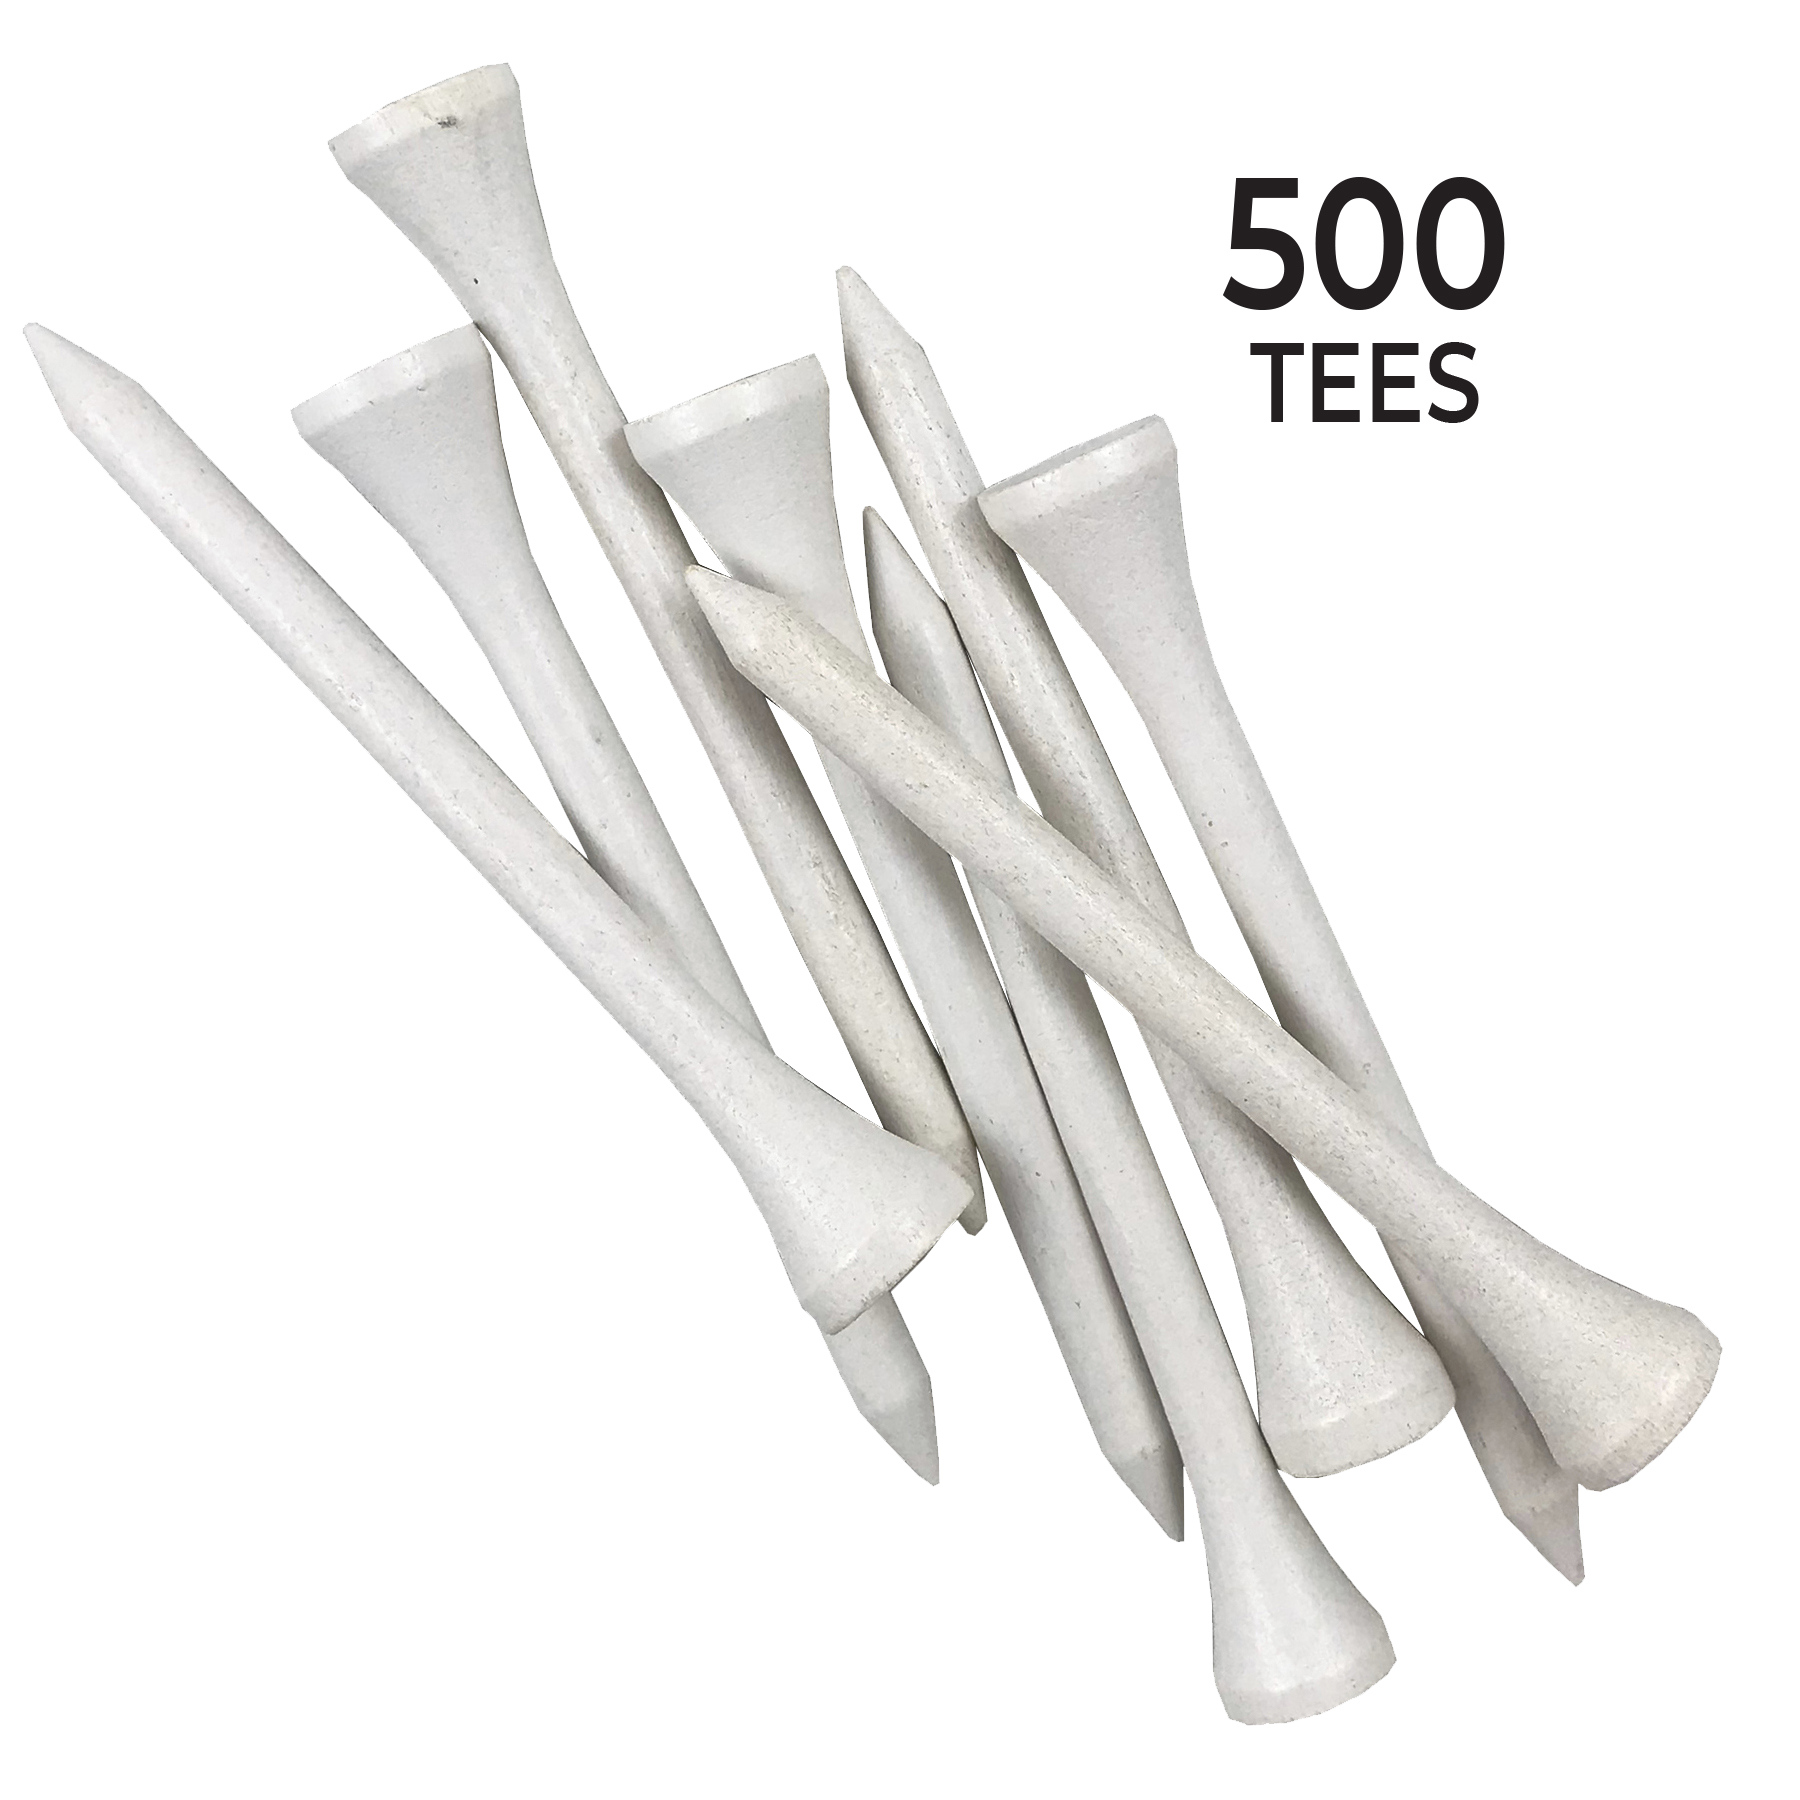 Pride Wood Golf Tee, 2-3/4 inch, White, 500 Count - image 3 of 8